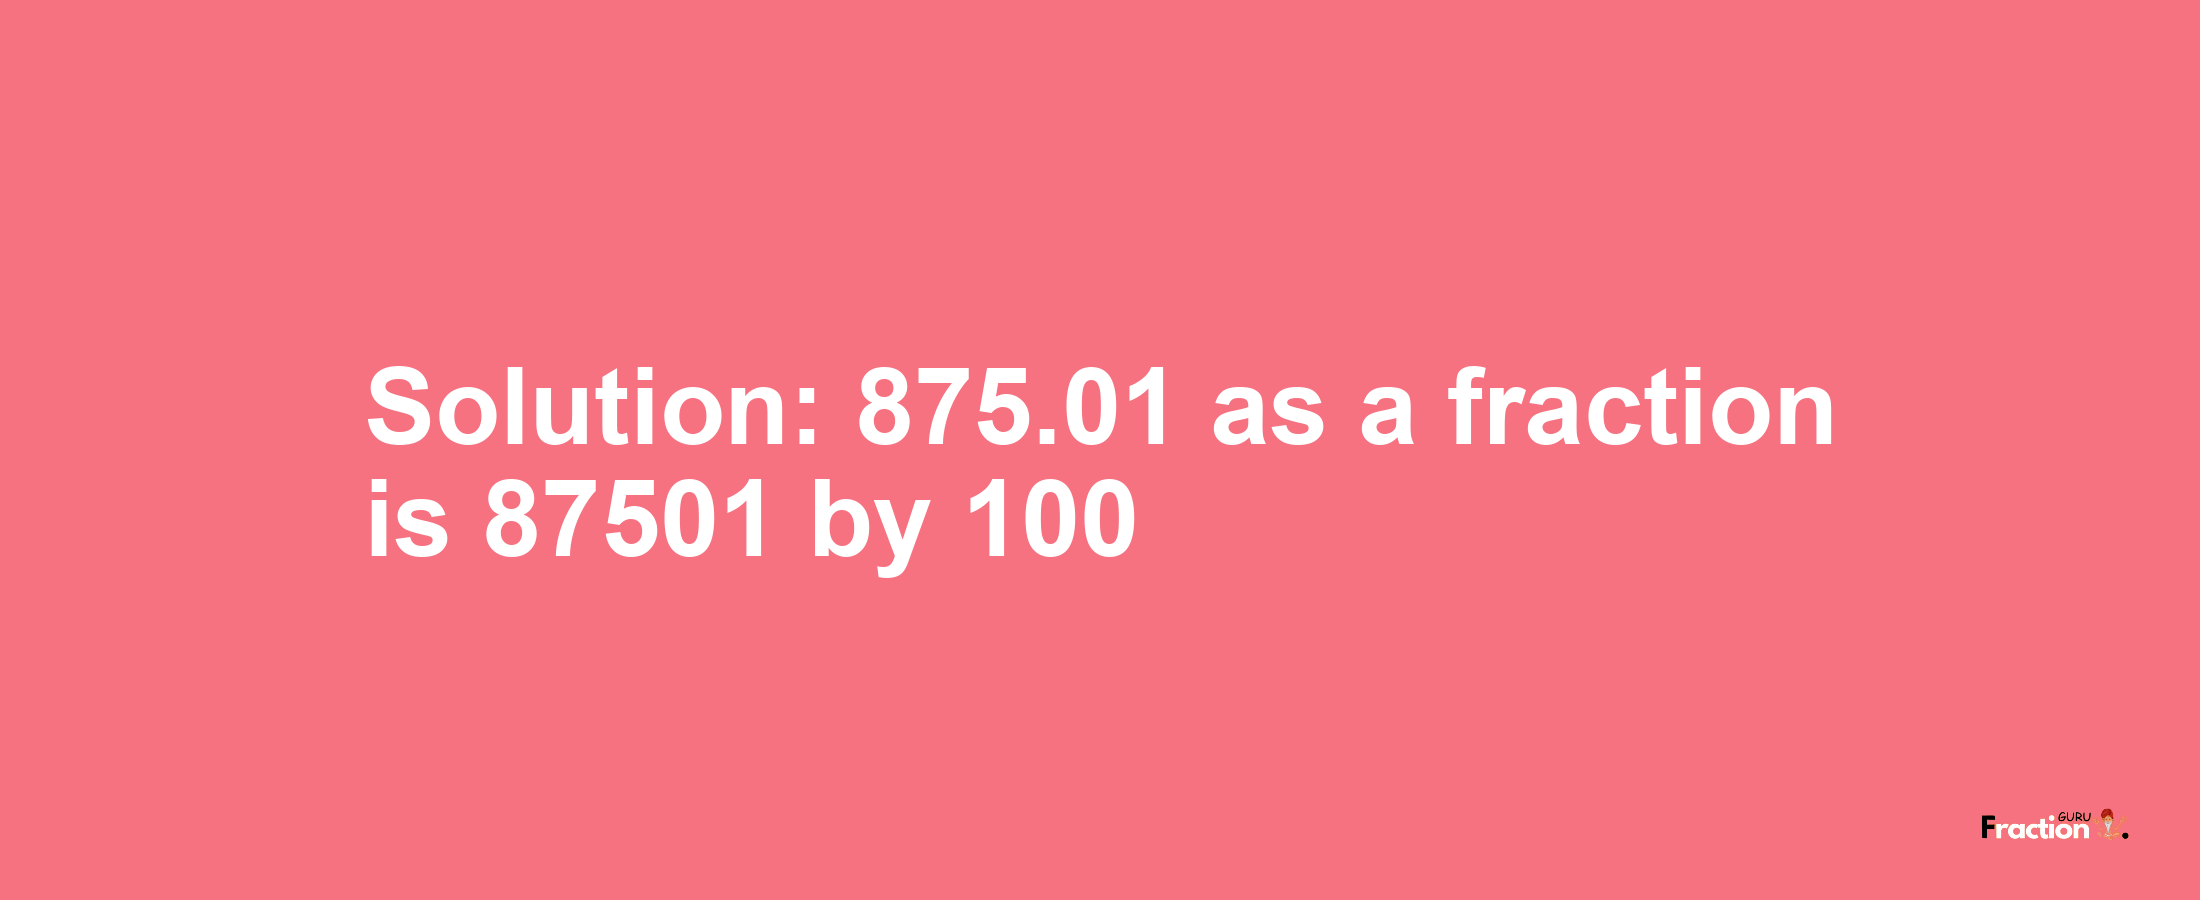 Solution:875.01 as a fraction is 87501/100